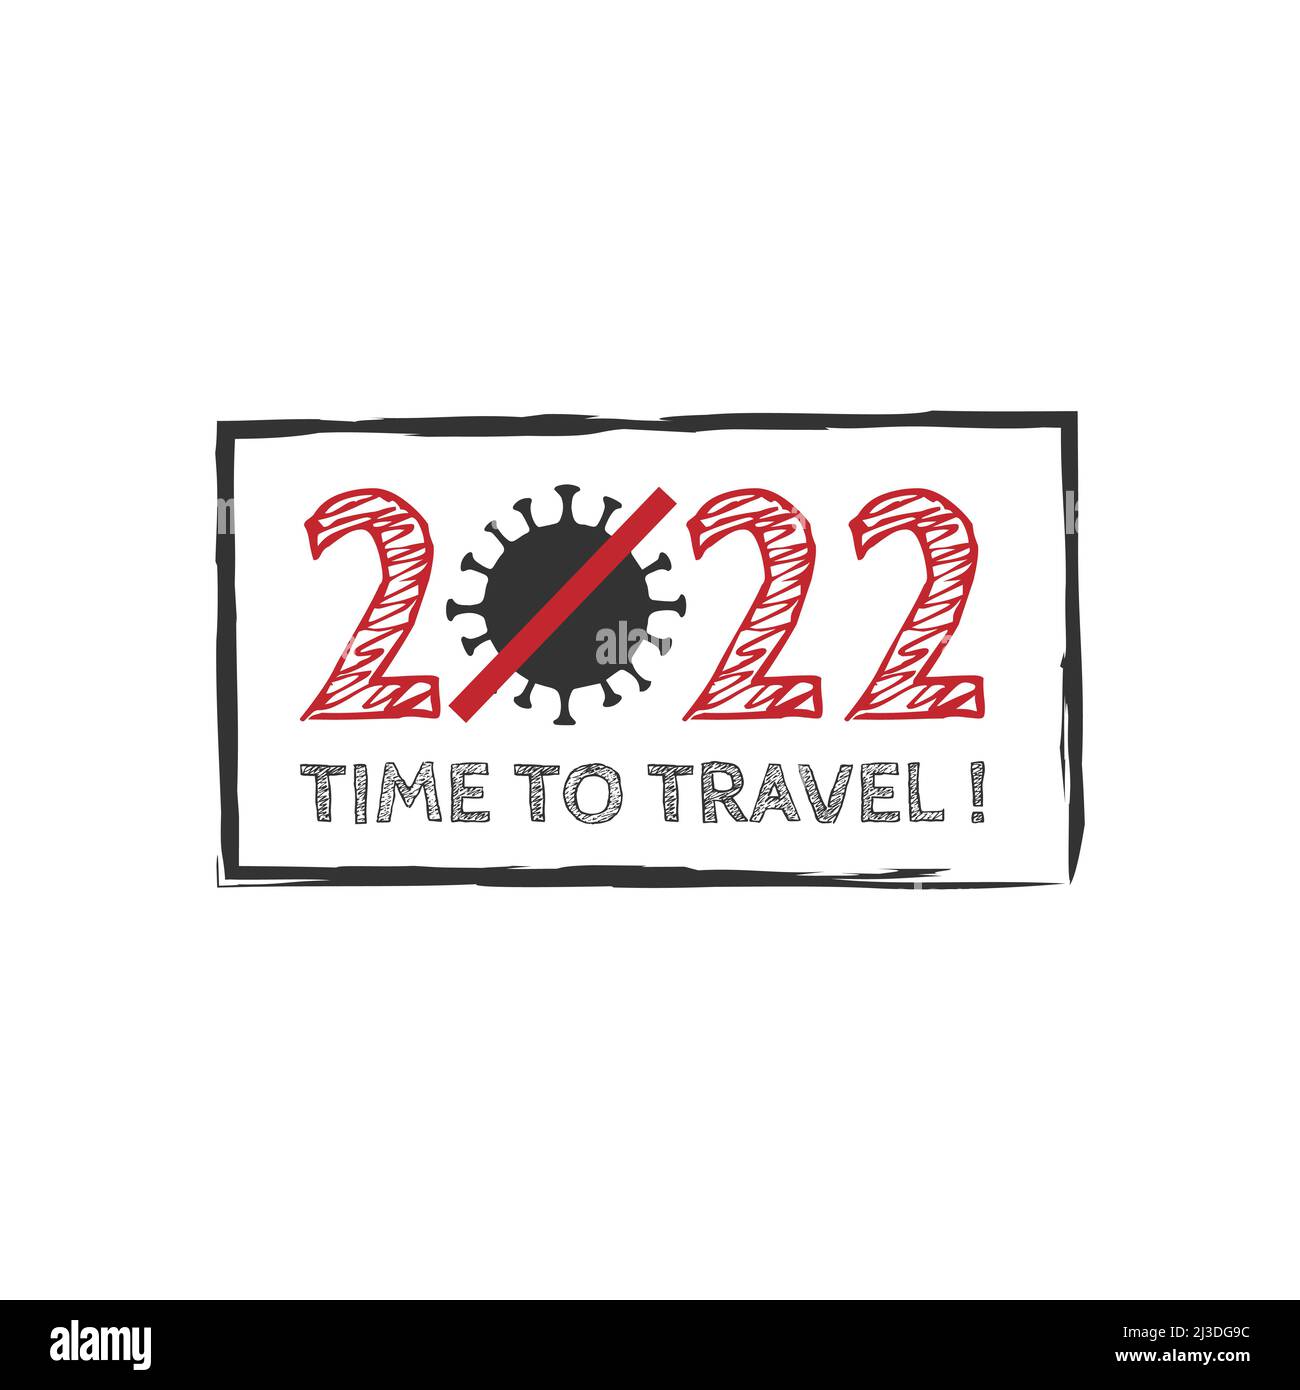 It's time to traveling grunge stamp 2022, No more covid!. Grunge rubber stamp about traveling after pandemi 2022 Stock Vector